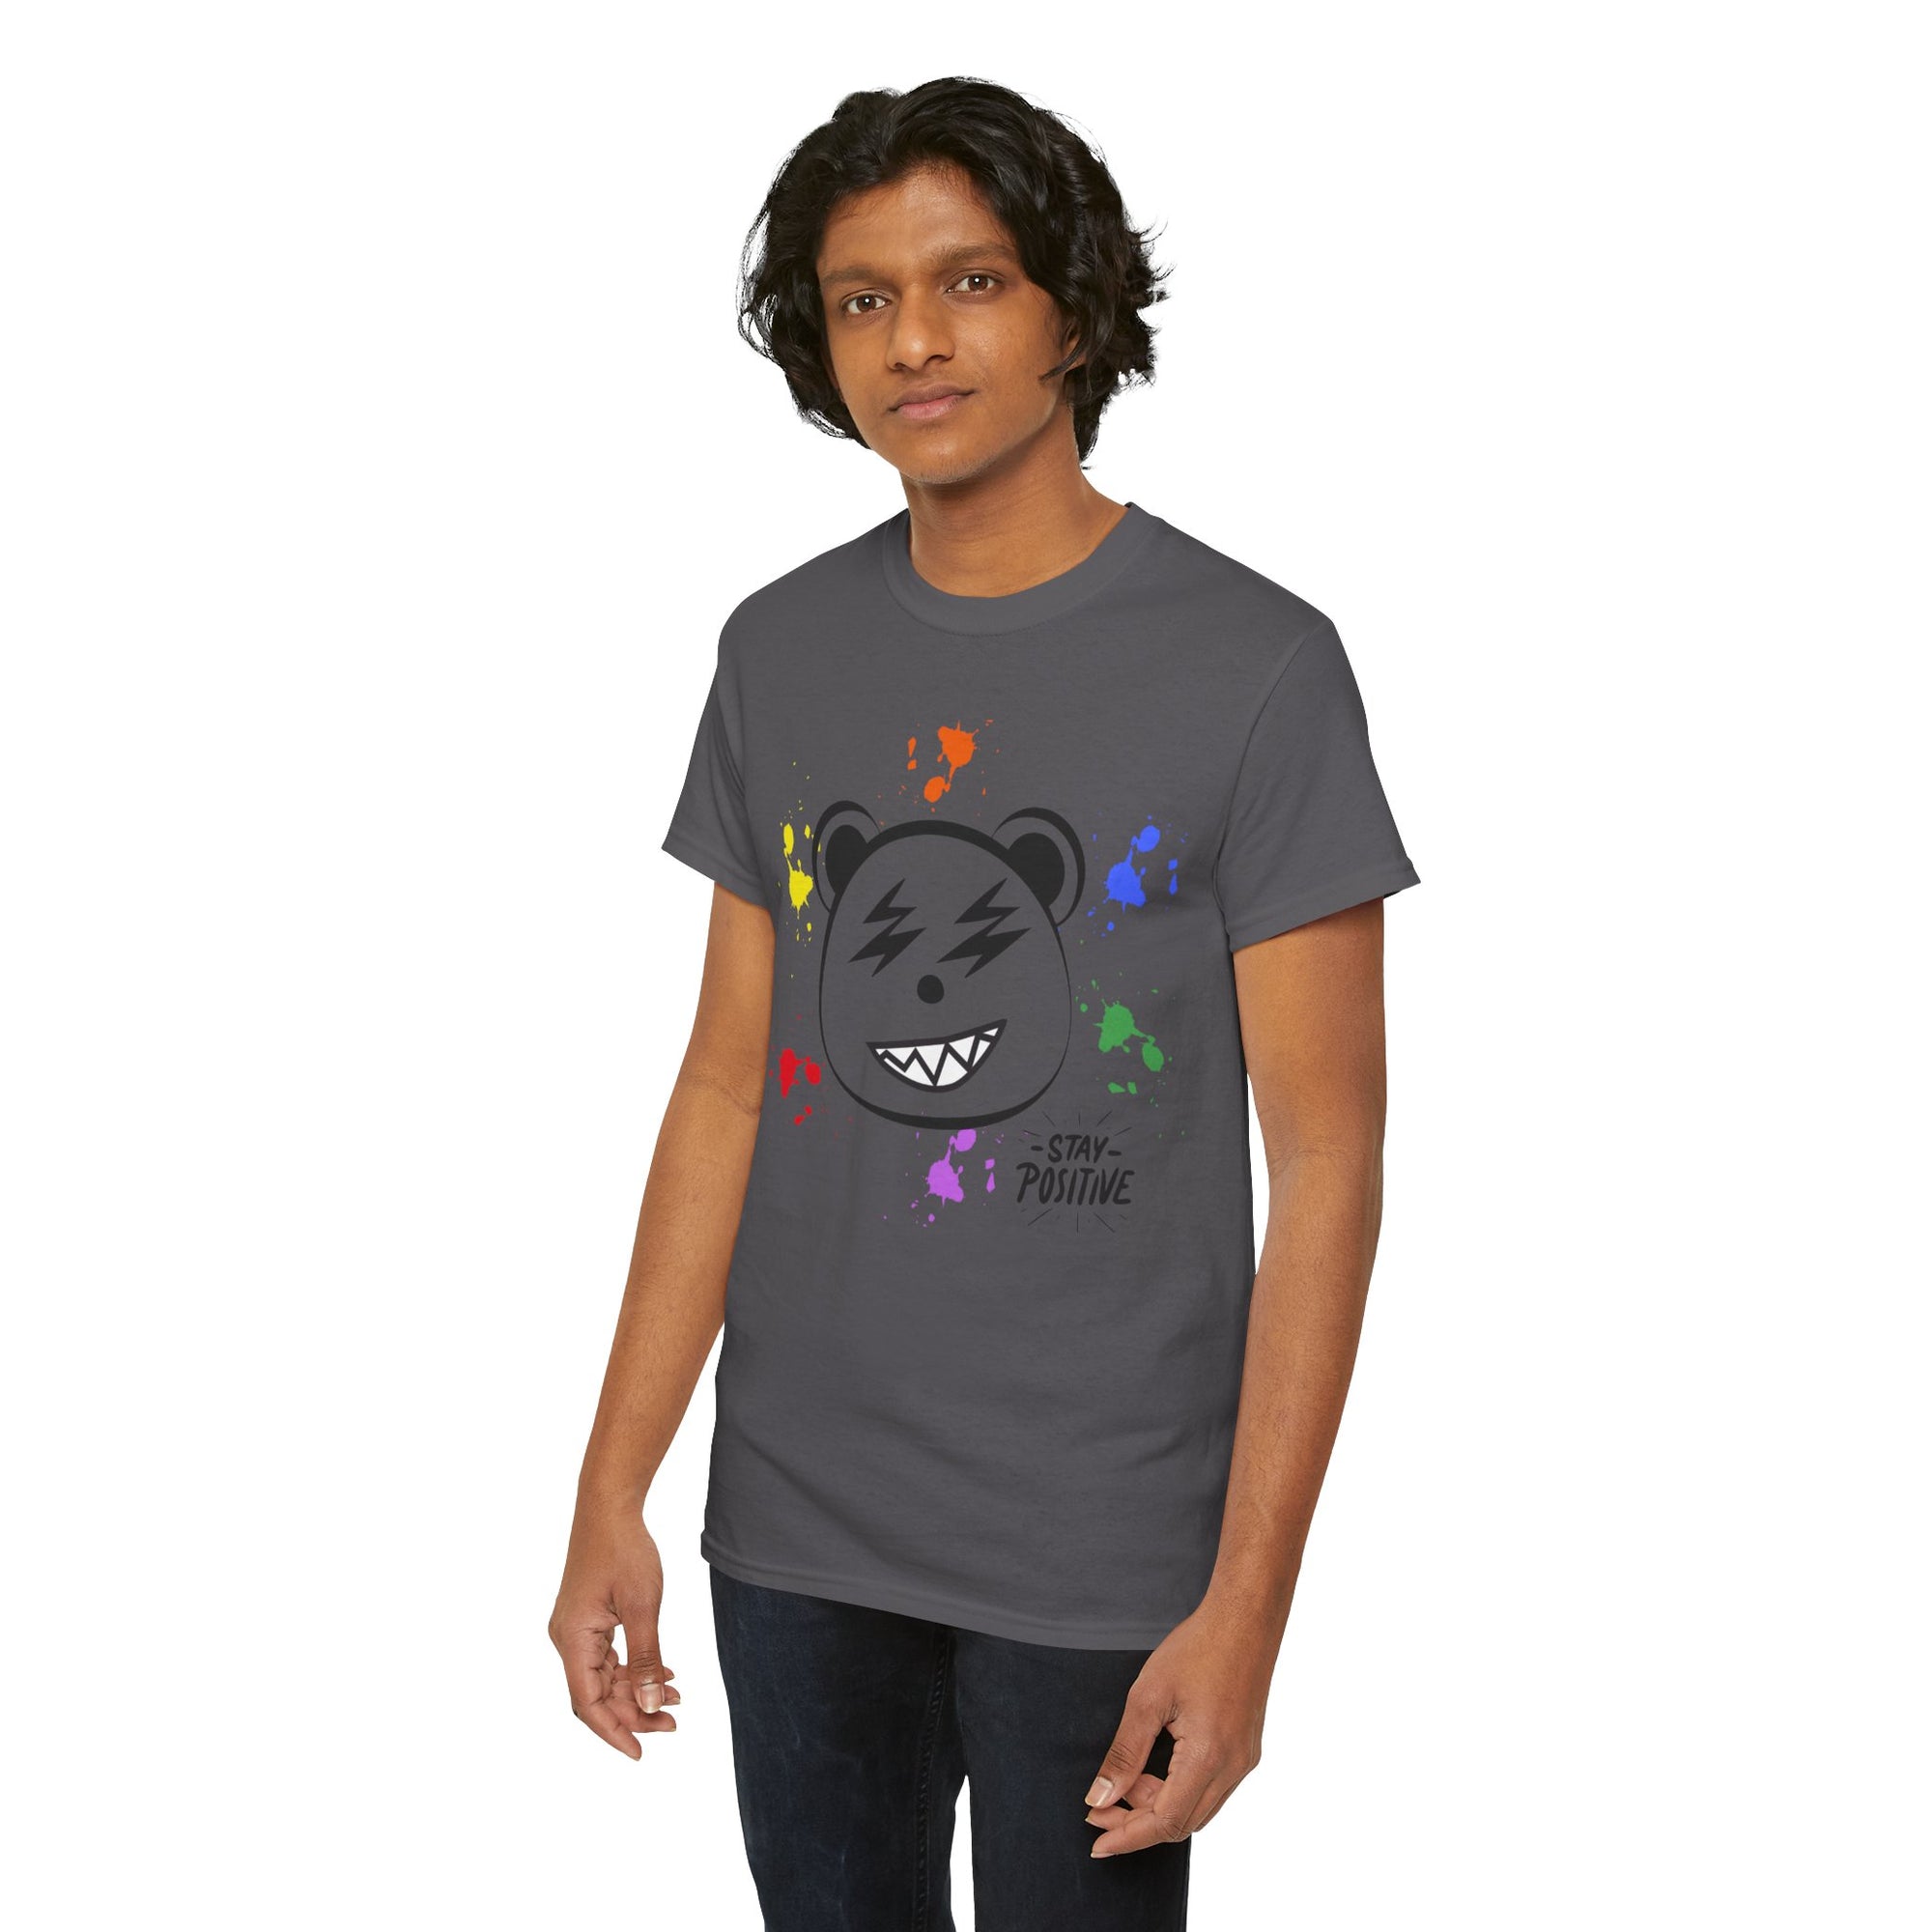 Custom Cotton Tee with Cool Bear/stay positive